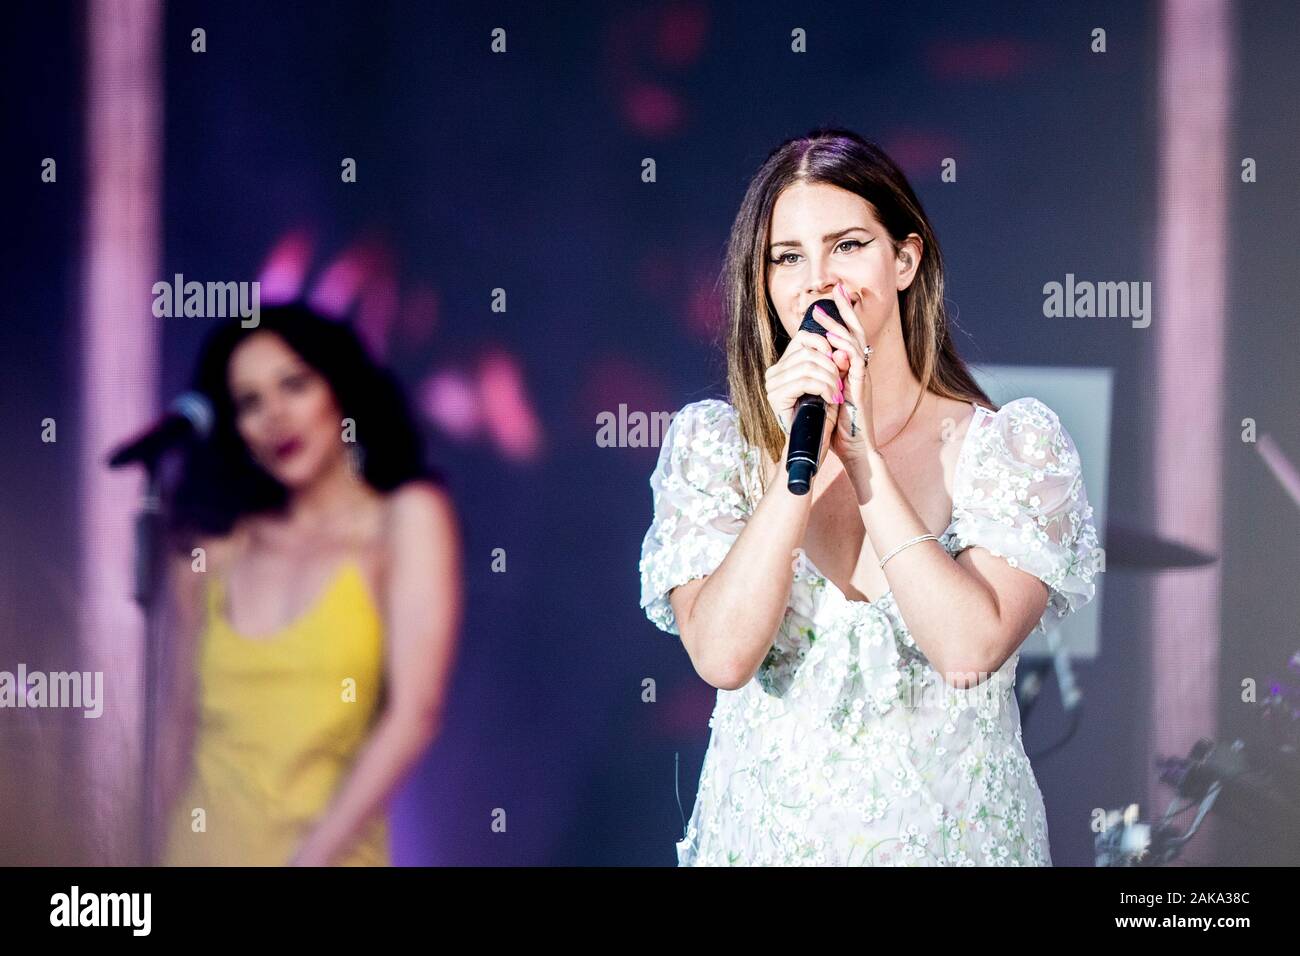 Odense, Denmark. 27th, June 2019. The American singer and songwriter Lana del Rey performs a live concert during the Danish music festival Tinderbox 2019 in Odense. (Photo credit: Gonzales Photo - Lasse Lagoni). Stock Photo